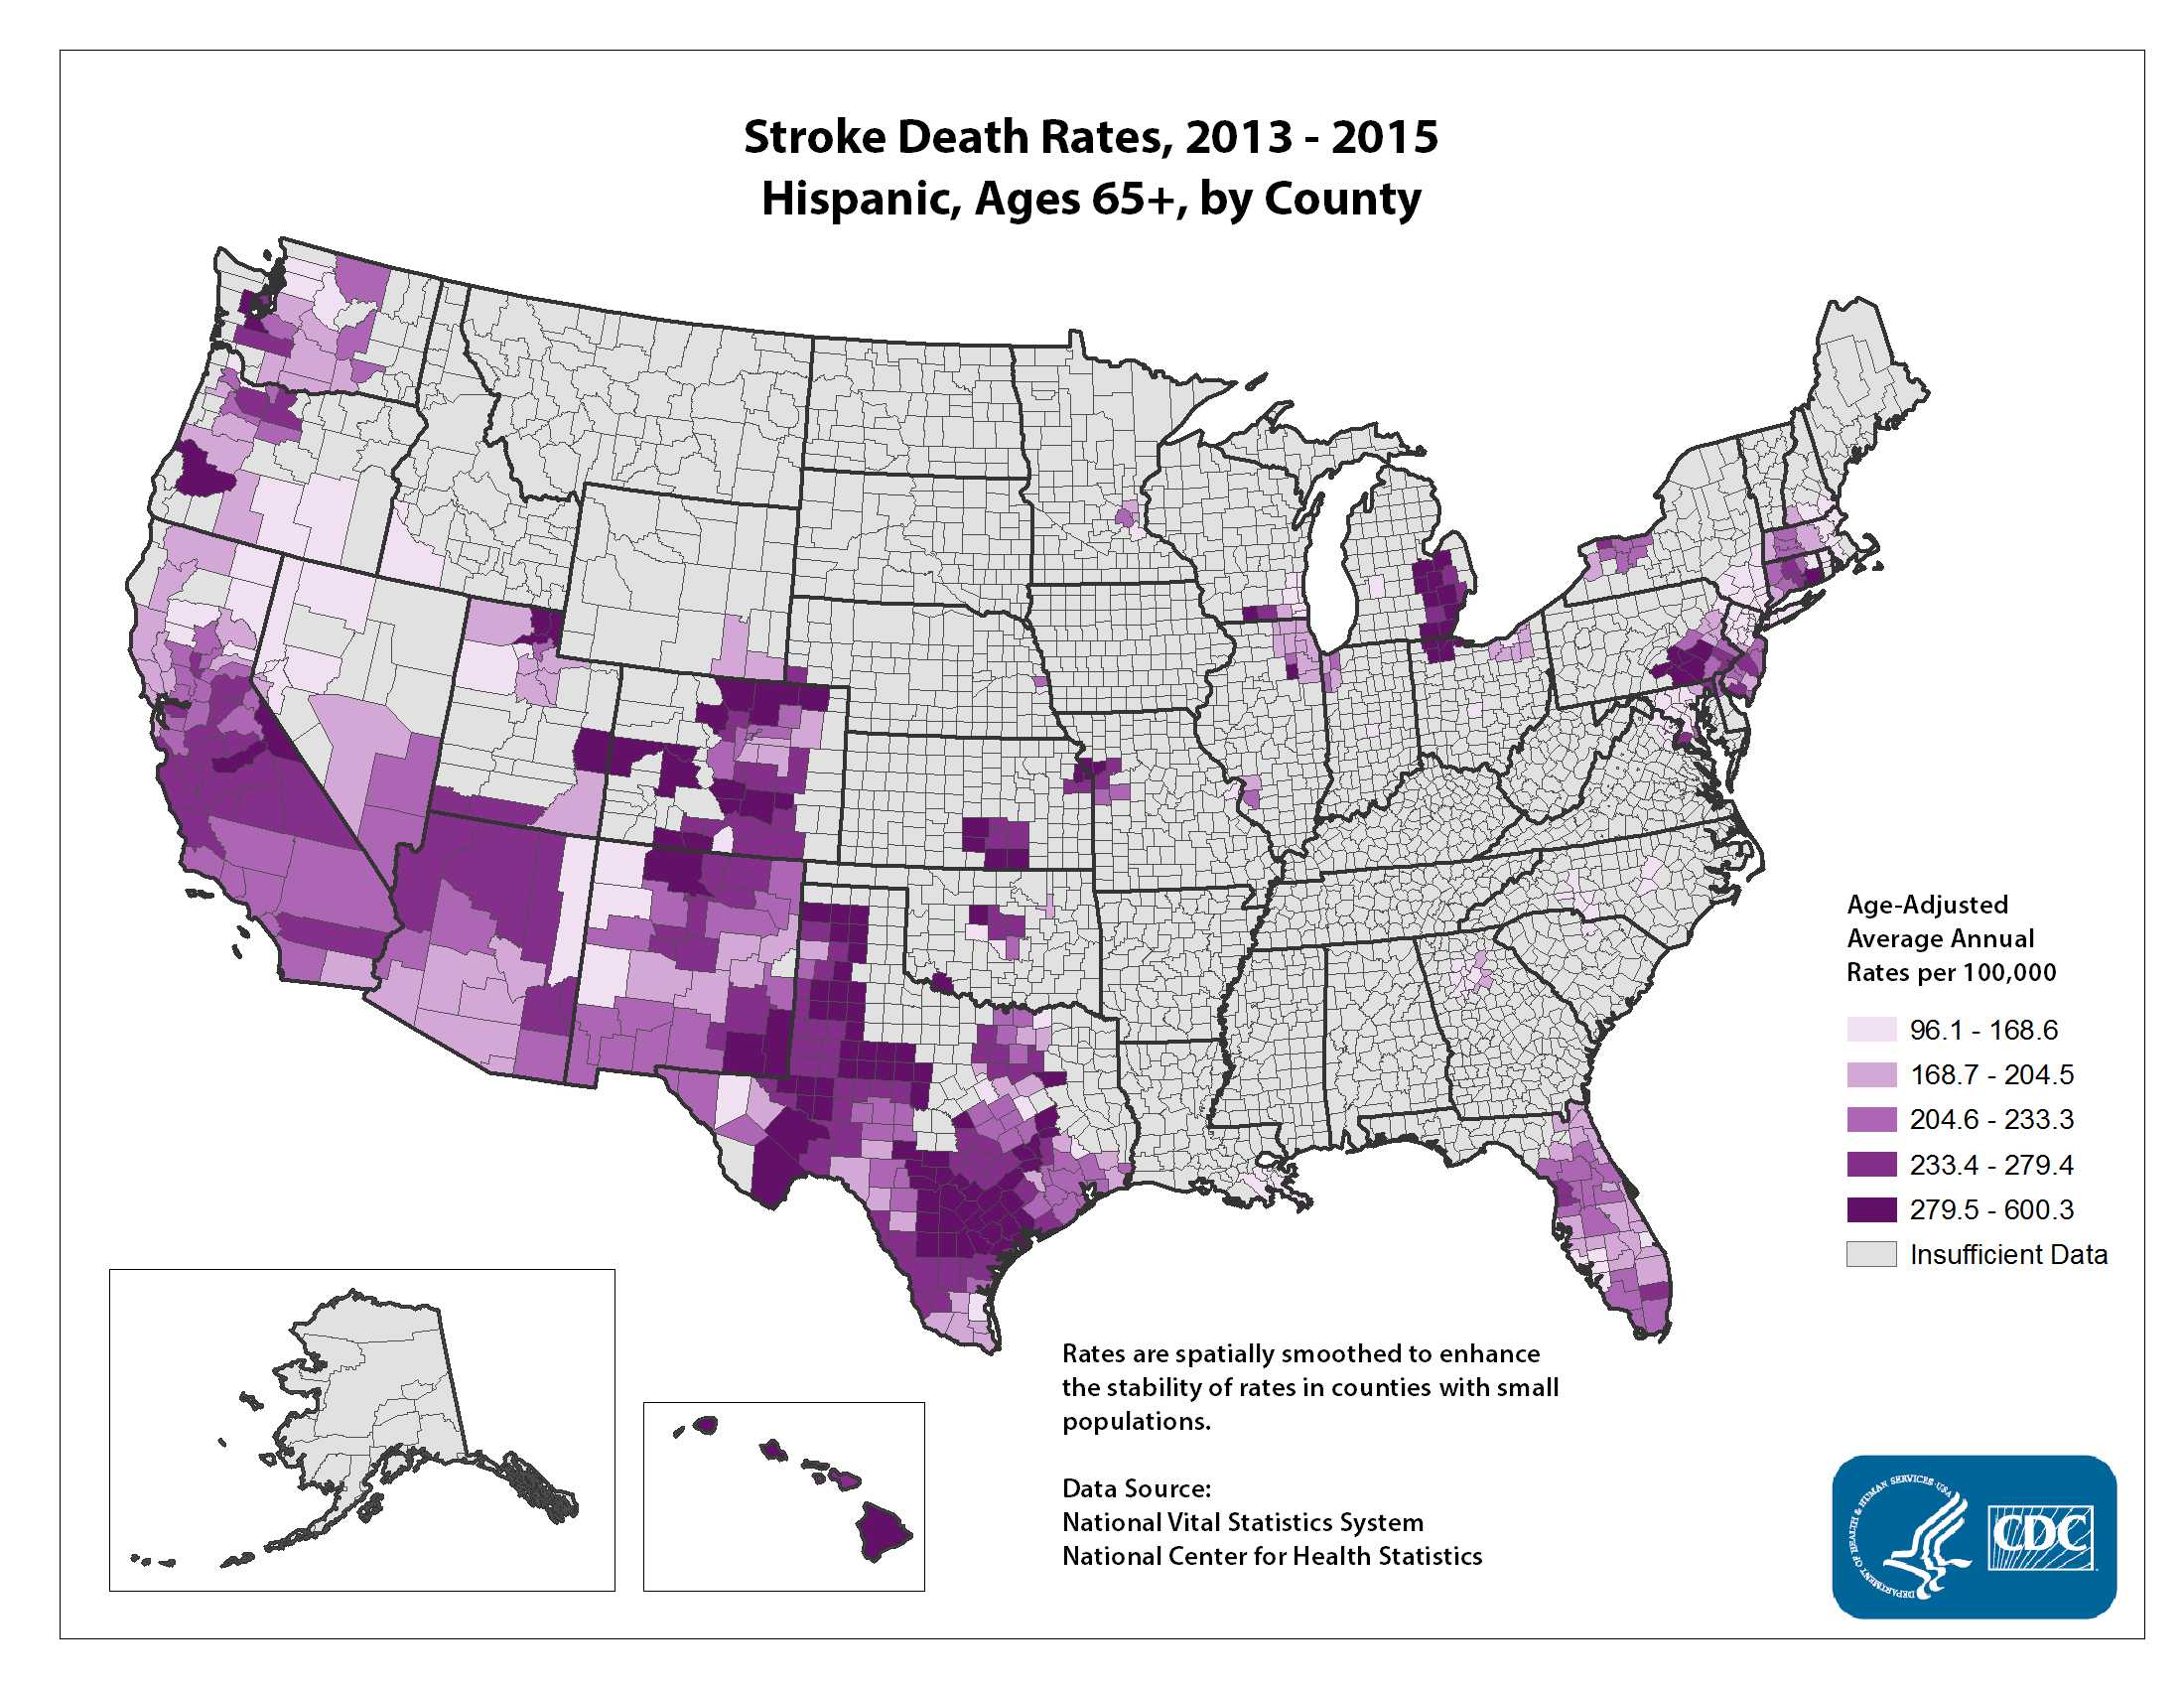 Stroke Death Rates for 2012 through 2014 for Hispanics Aged 65 Years and Older by County. The map shows that concentrations of counties with the highest stroke death rates - meaning the top quintile - are located primarily in Hawaii, Texas, and parts of Colorado and Pennsylvania. Pockets of high-rate counties are also found in California and Michigan.